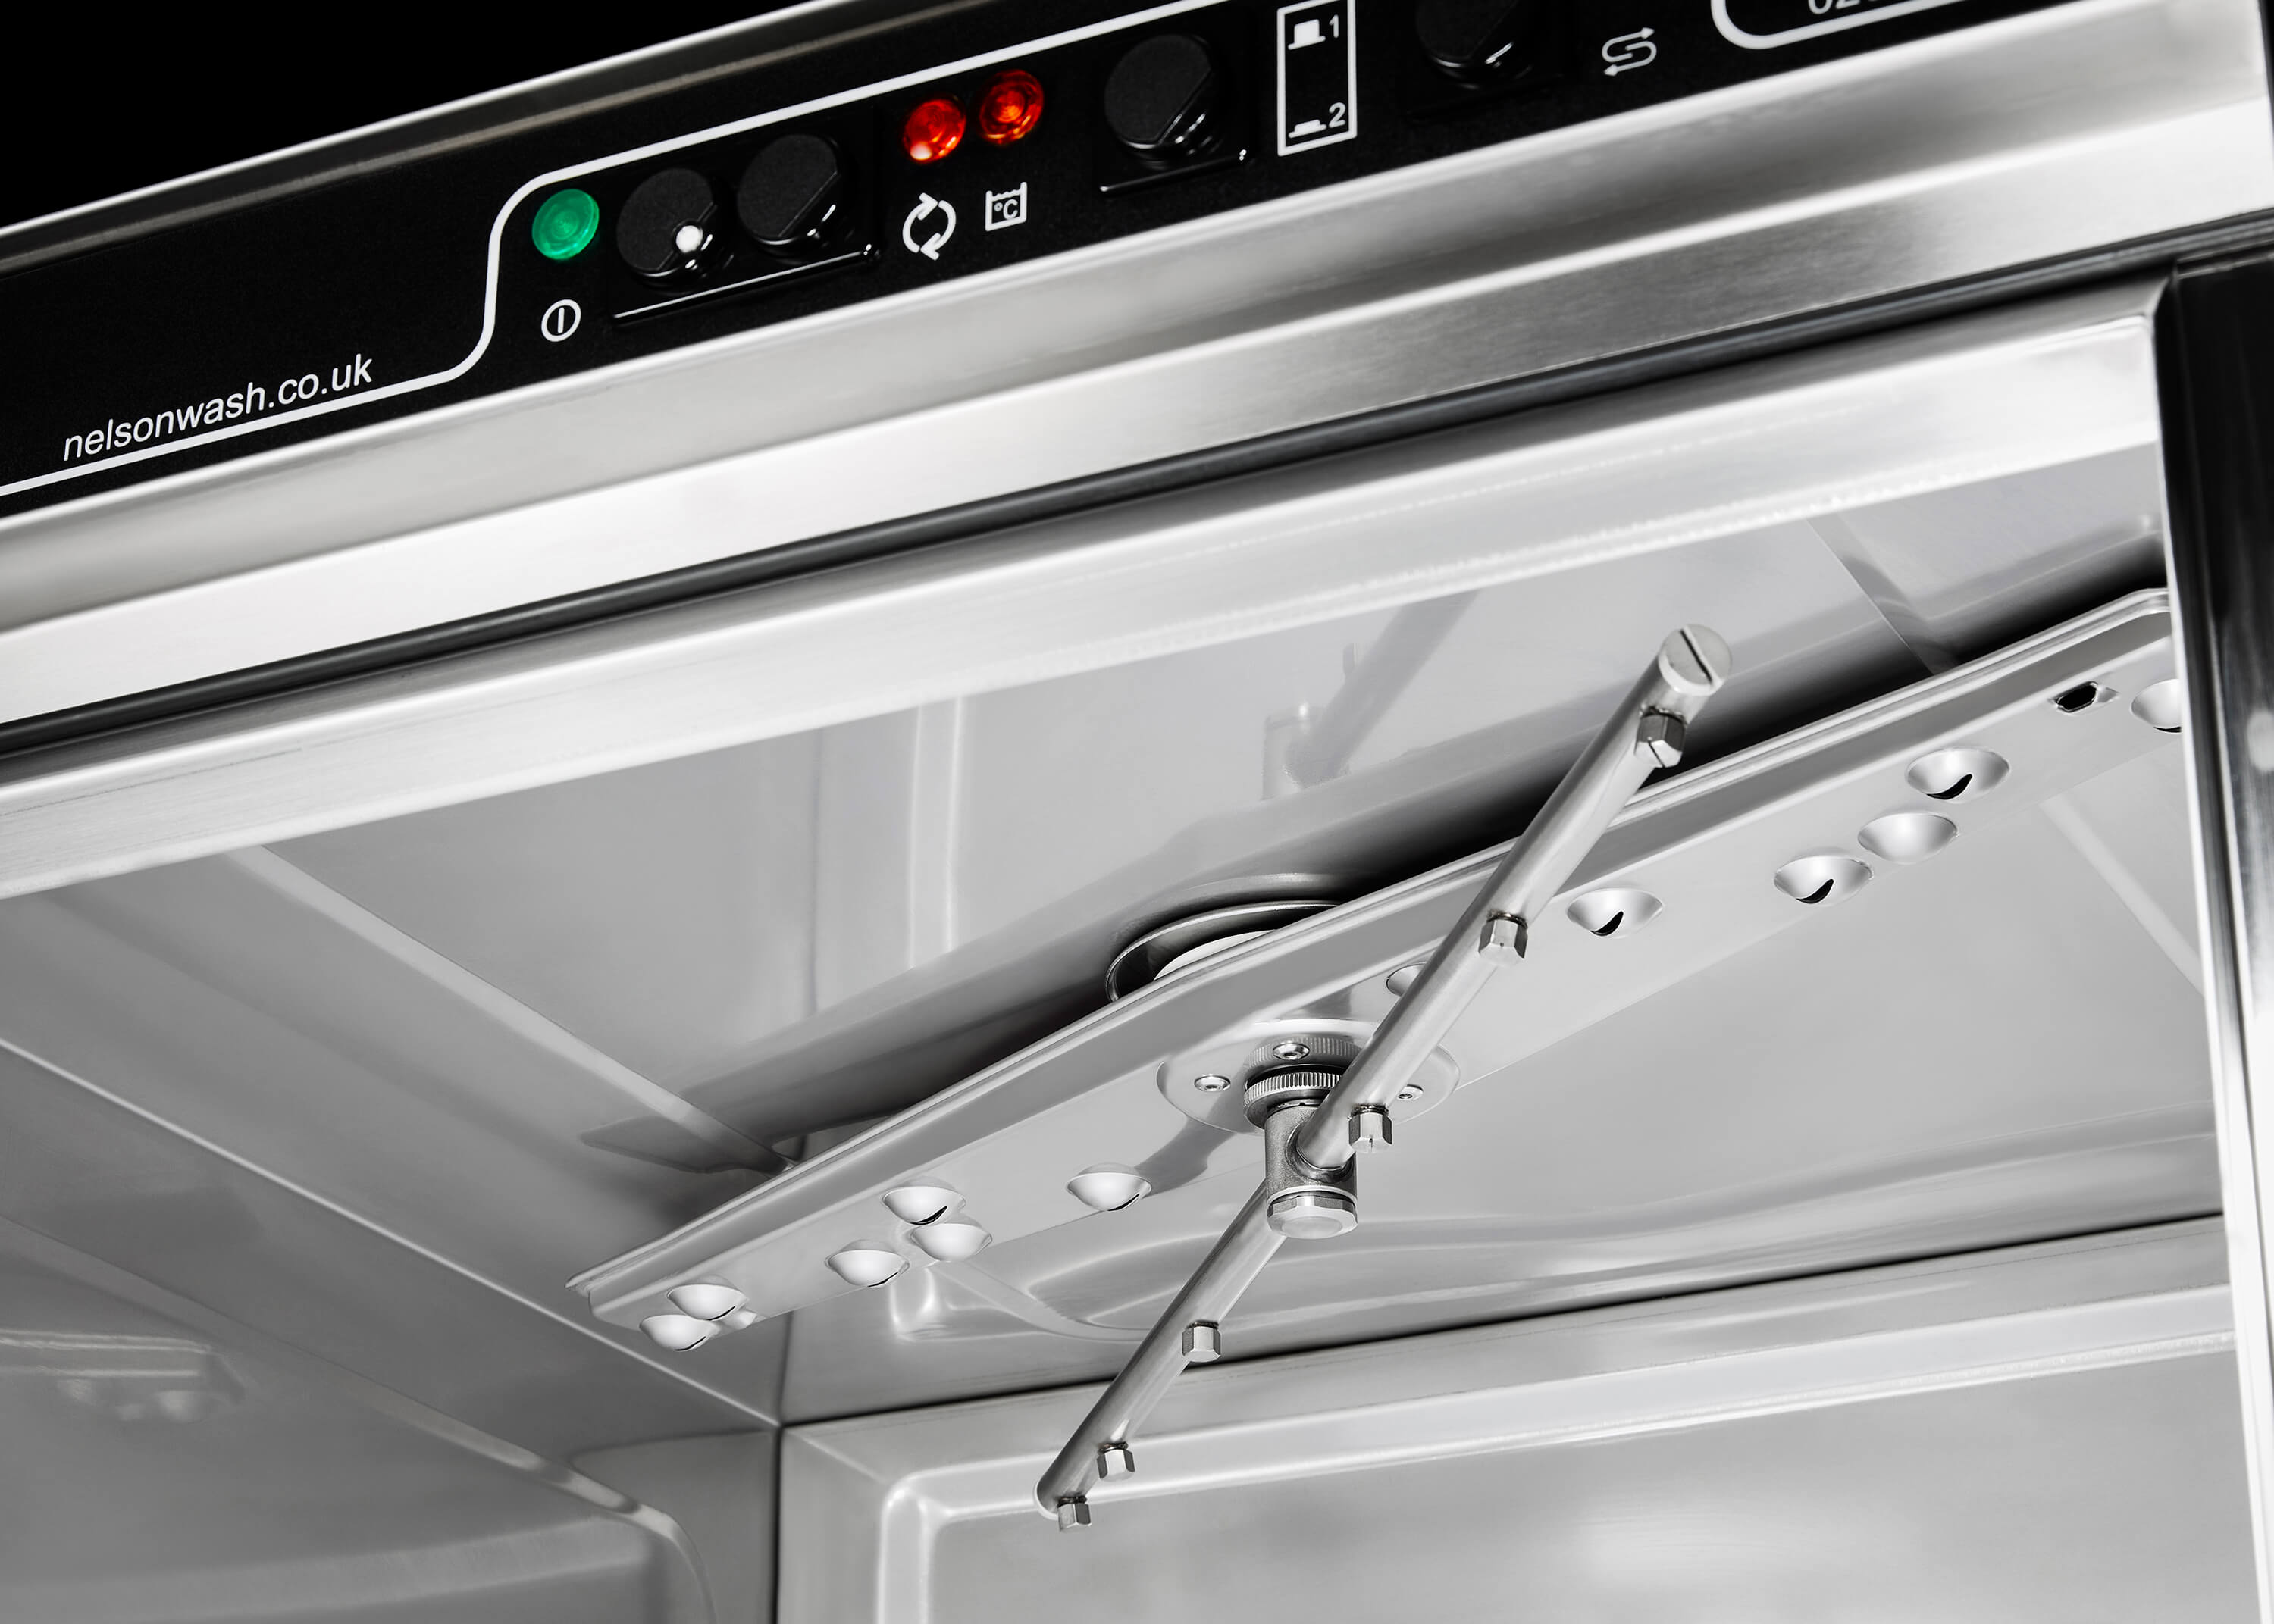 The stainless steel upper wash and rinse arms on the SW50 commercial dishwasher